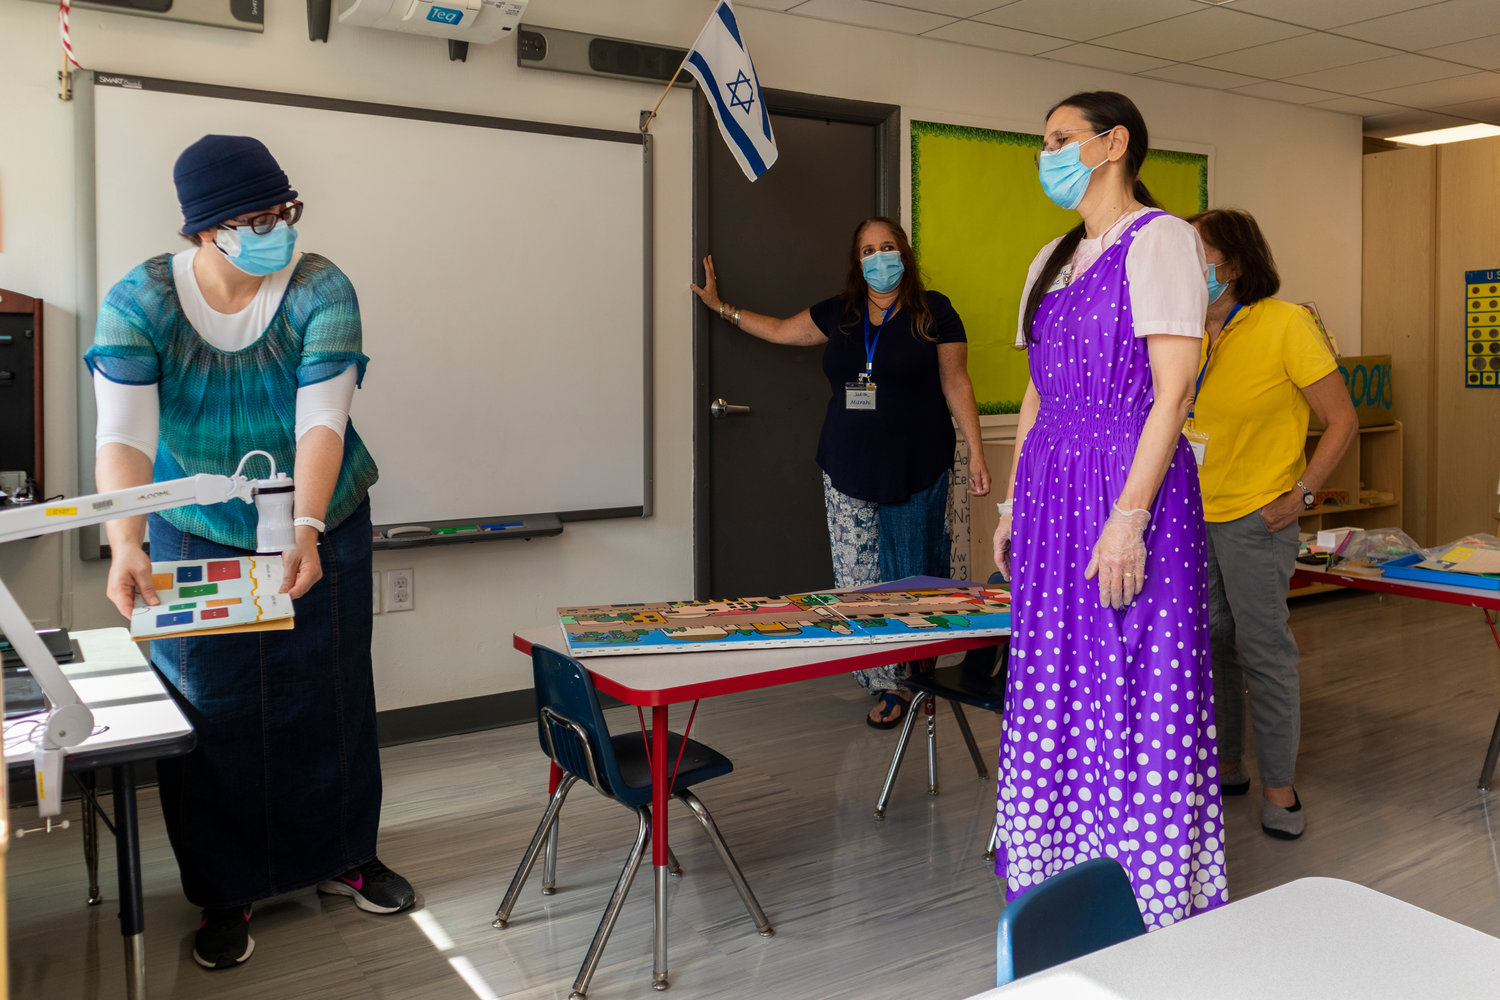 At Kinneret Day School, teachers had to adapt to a wide array of completely new teaching conditions. However, they found that by embracing these changes, they could adjust their teaching methods to better serve students.